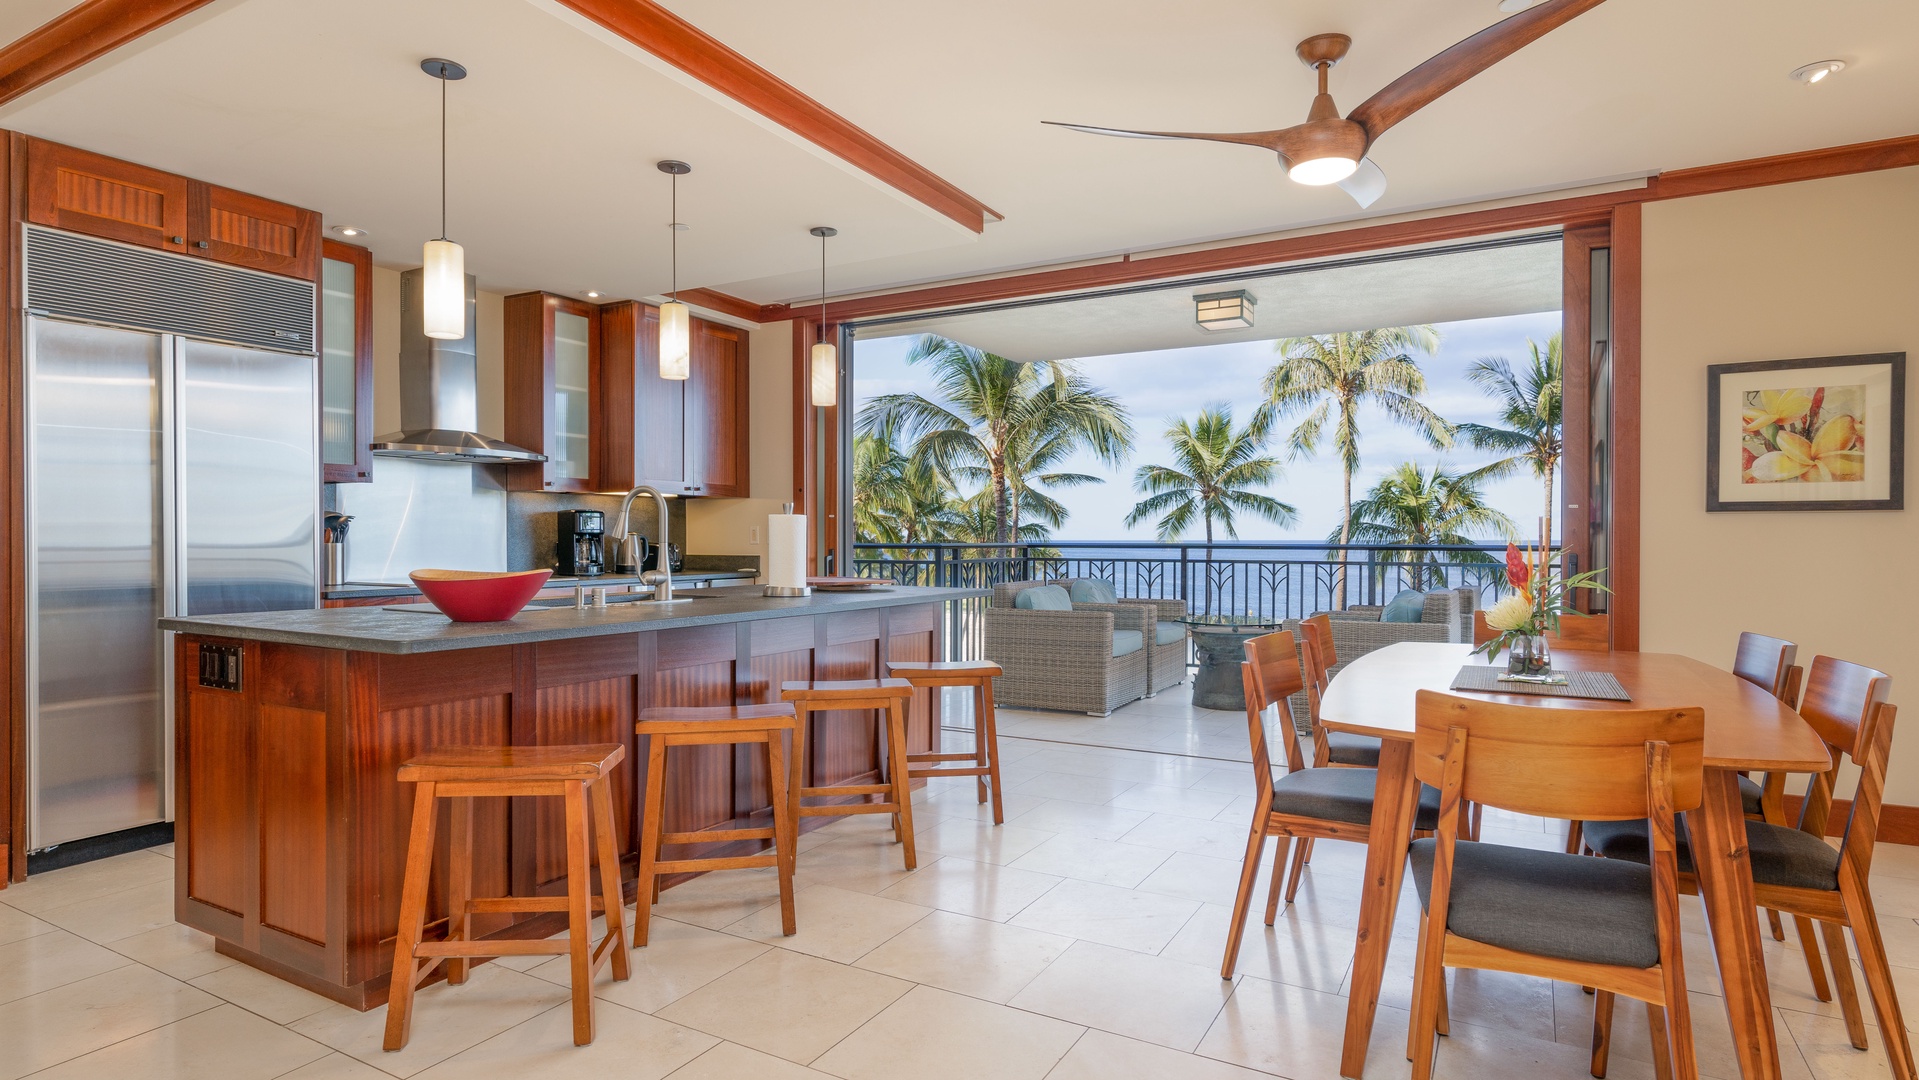 Kapolei Vacation Rentals, Ko Olina Beach Villas B309 - Dine with sea breezes and bar seating in the kitchen.